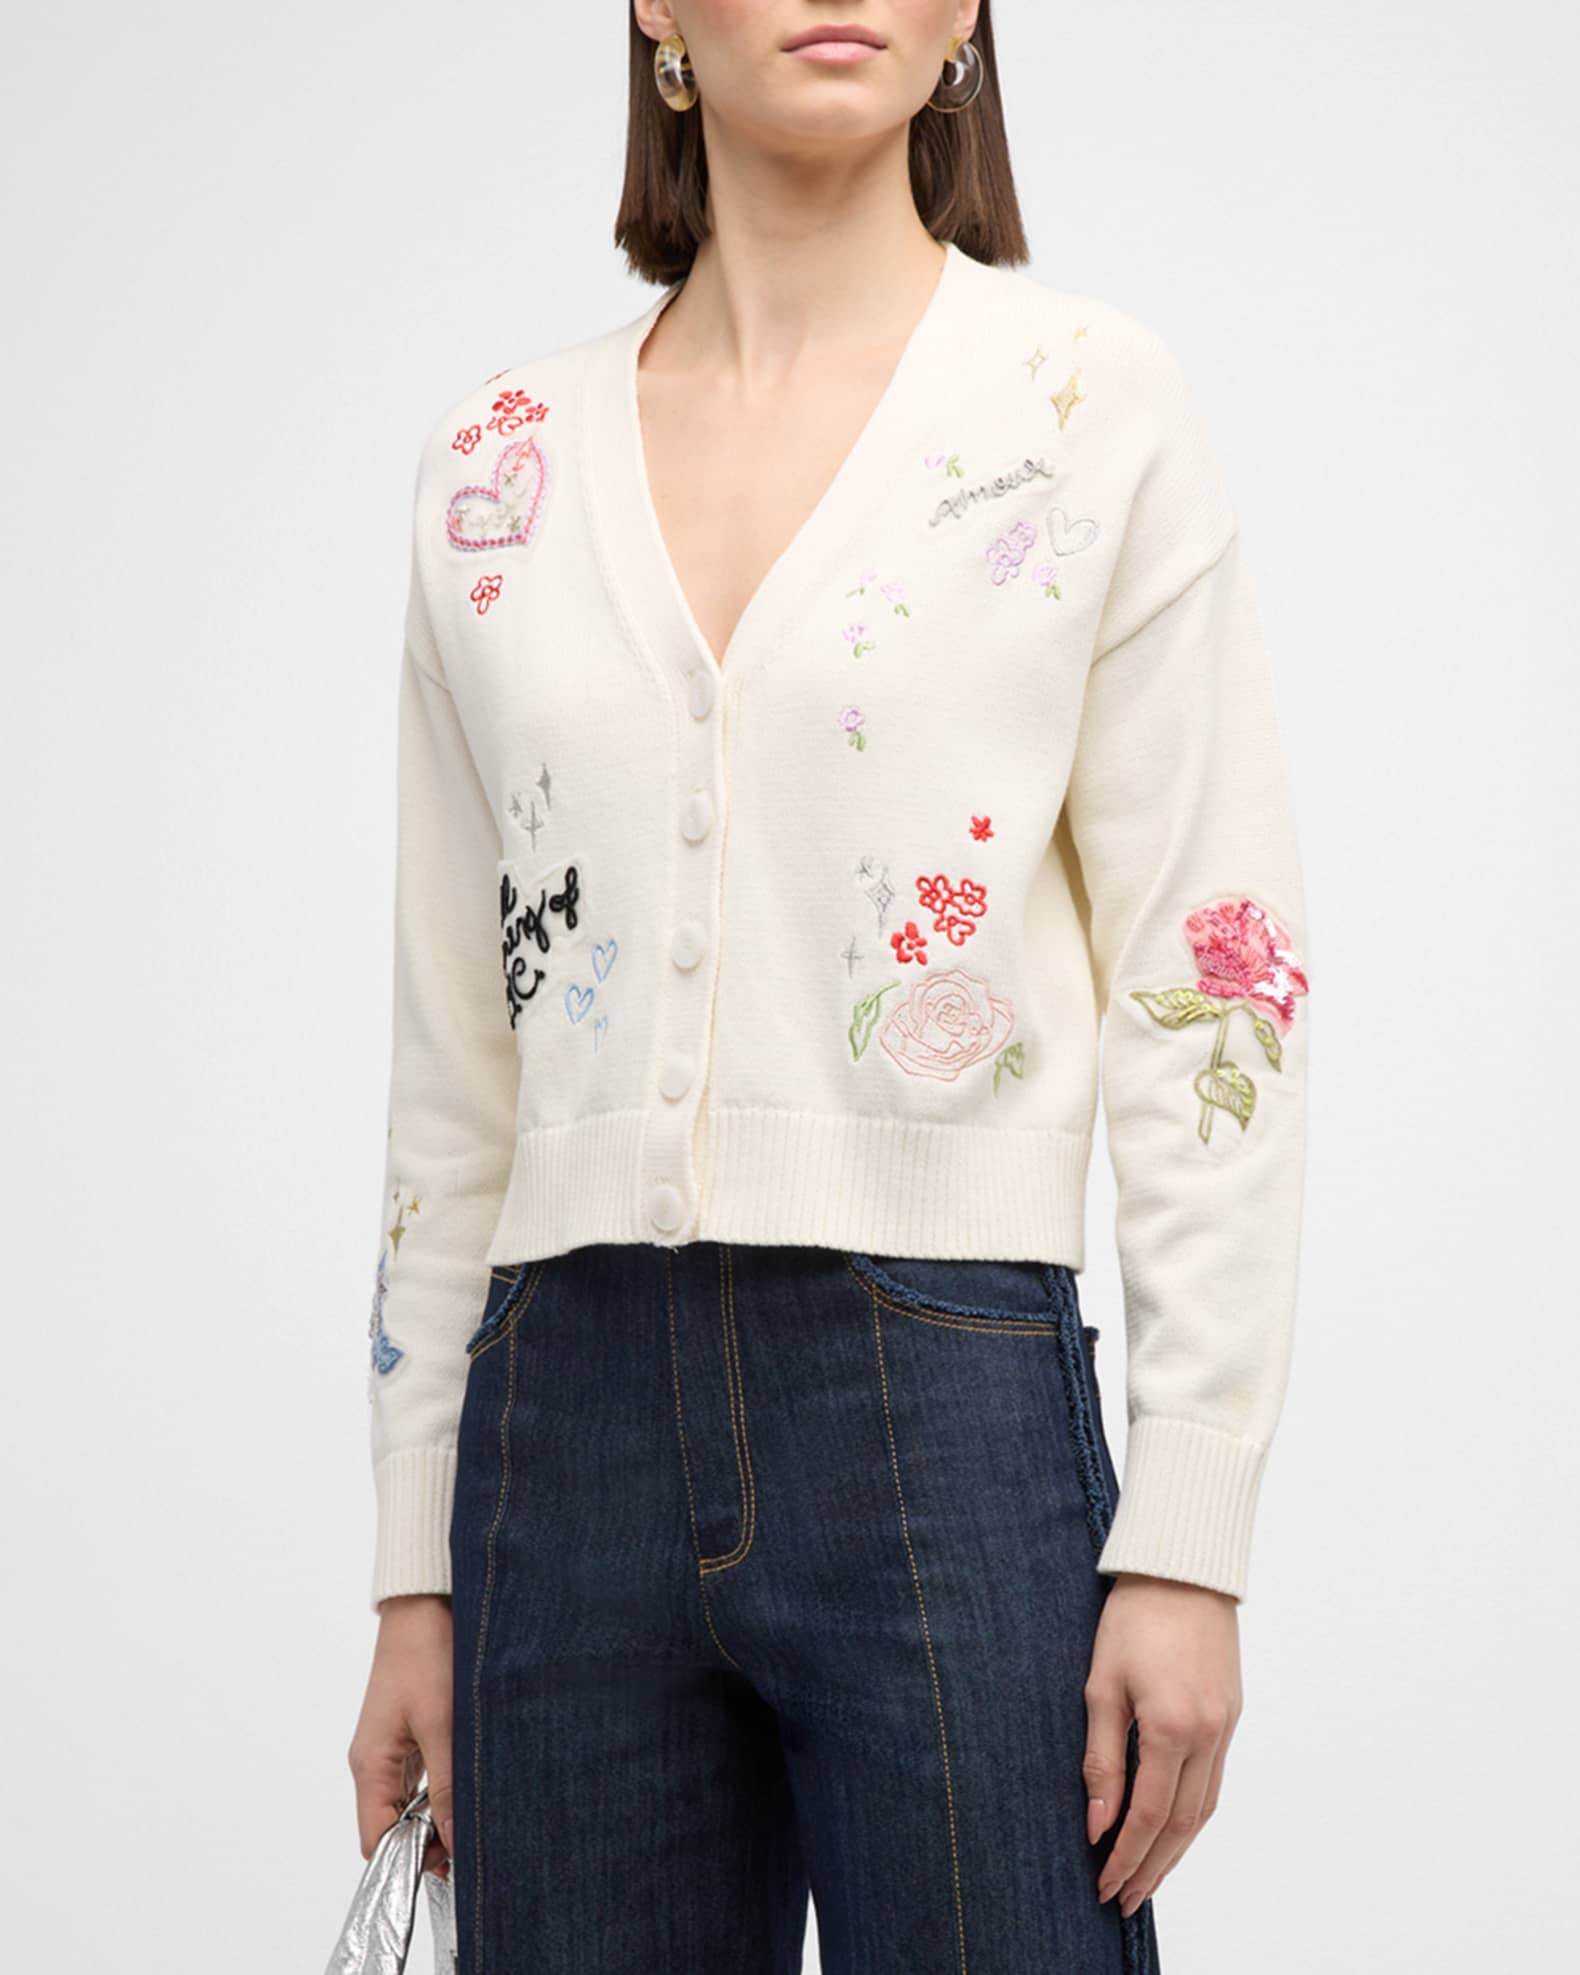 Nyla Daydream Doodles Embroidered Cardigan | Neiman Marcus